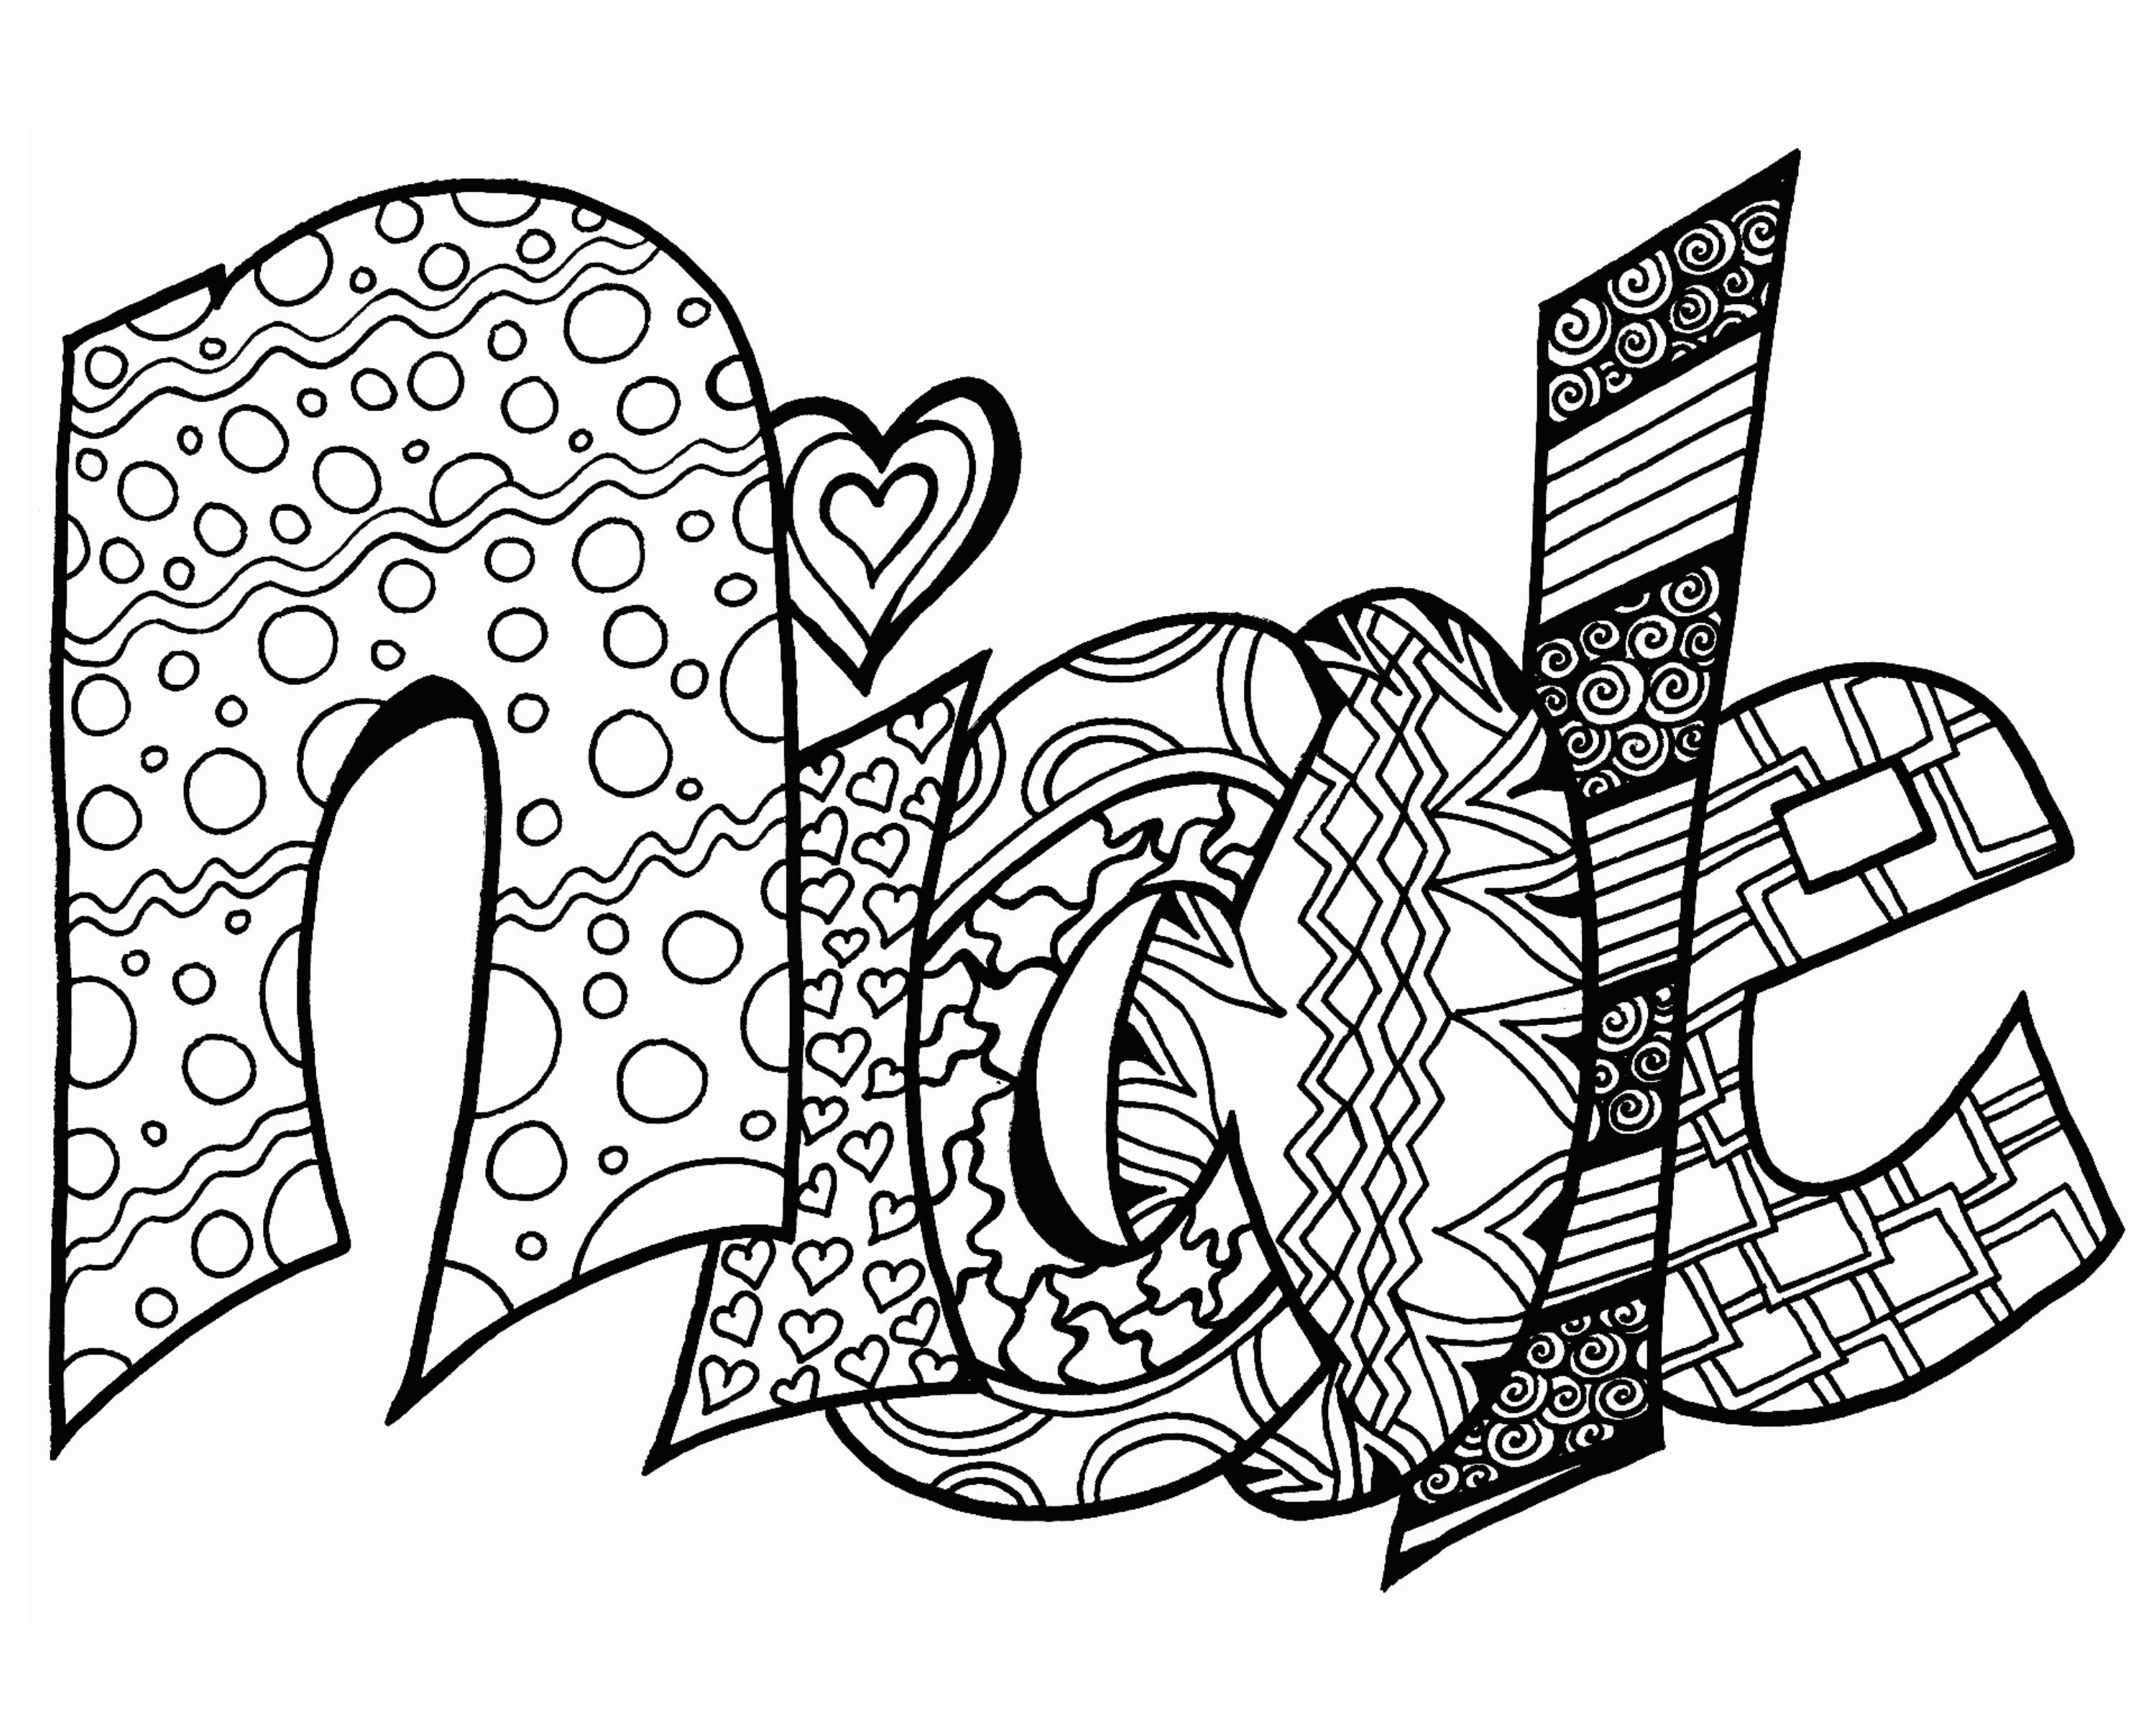 printable name coloring pages That are Impertinent | Derrick Website